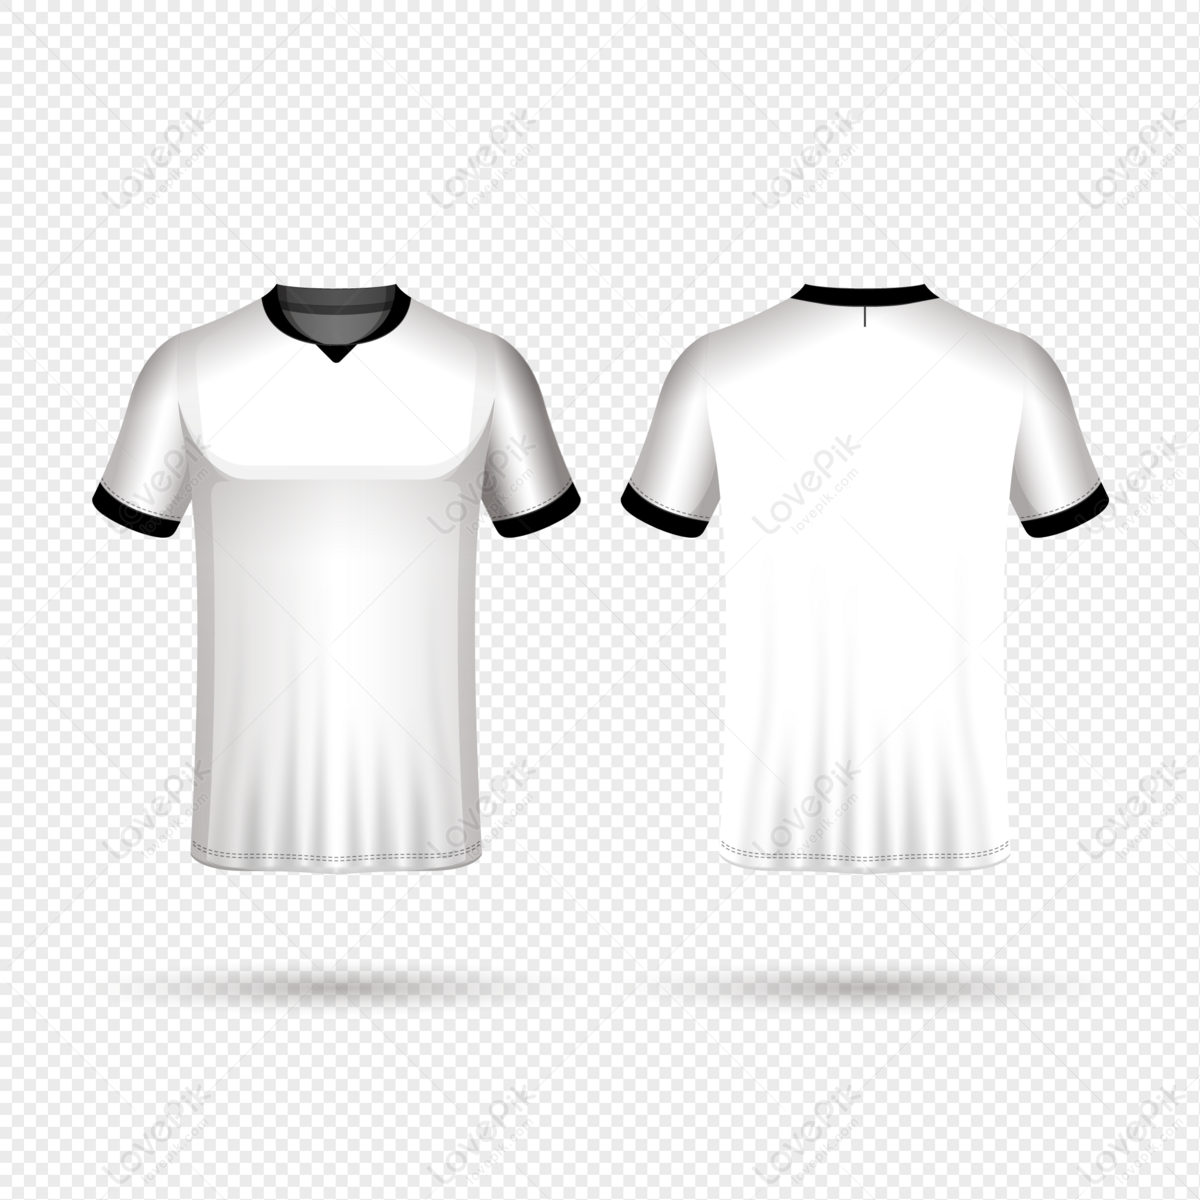 Jersey Template PNG and Jersey Template Transparent Clipart Free